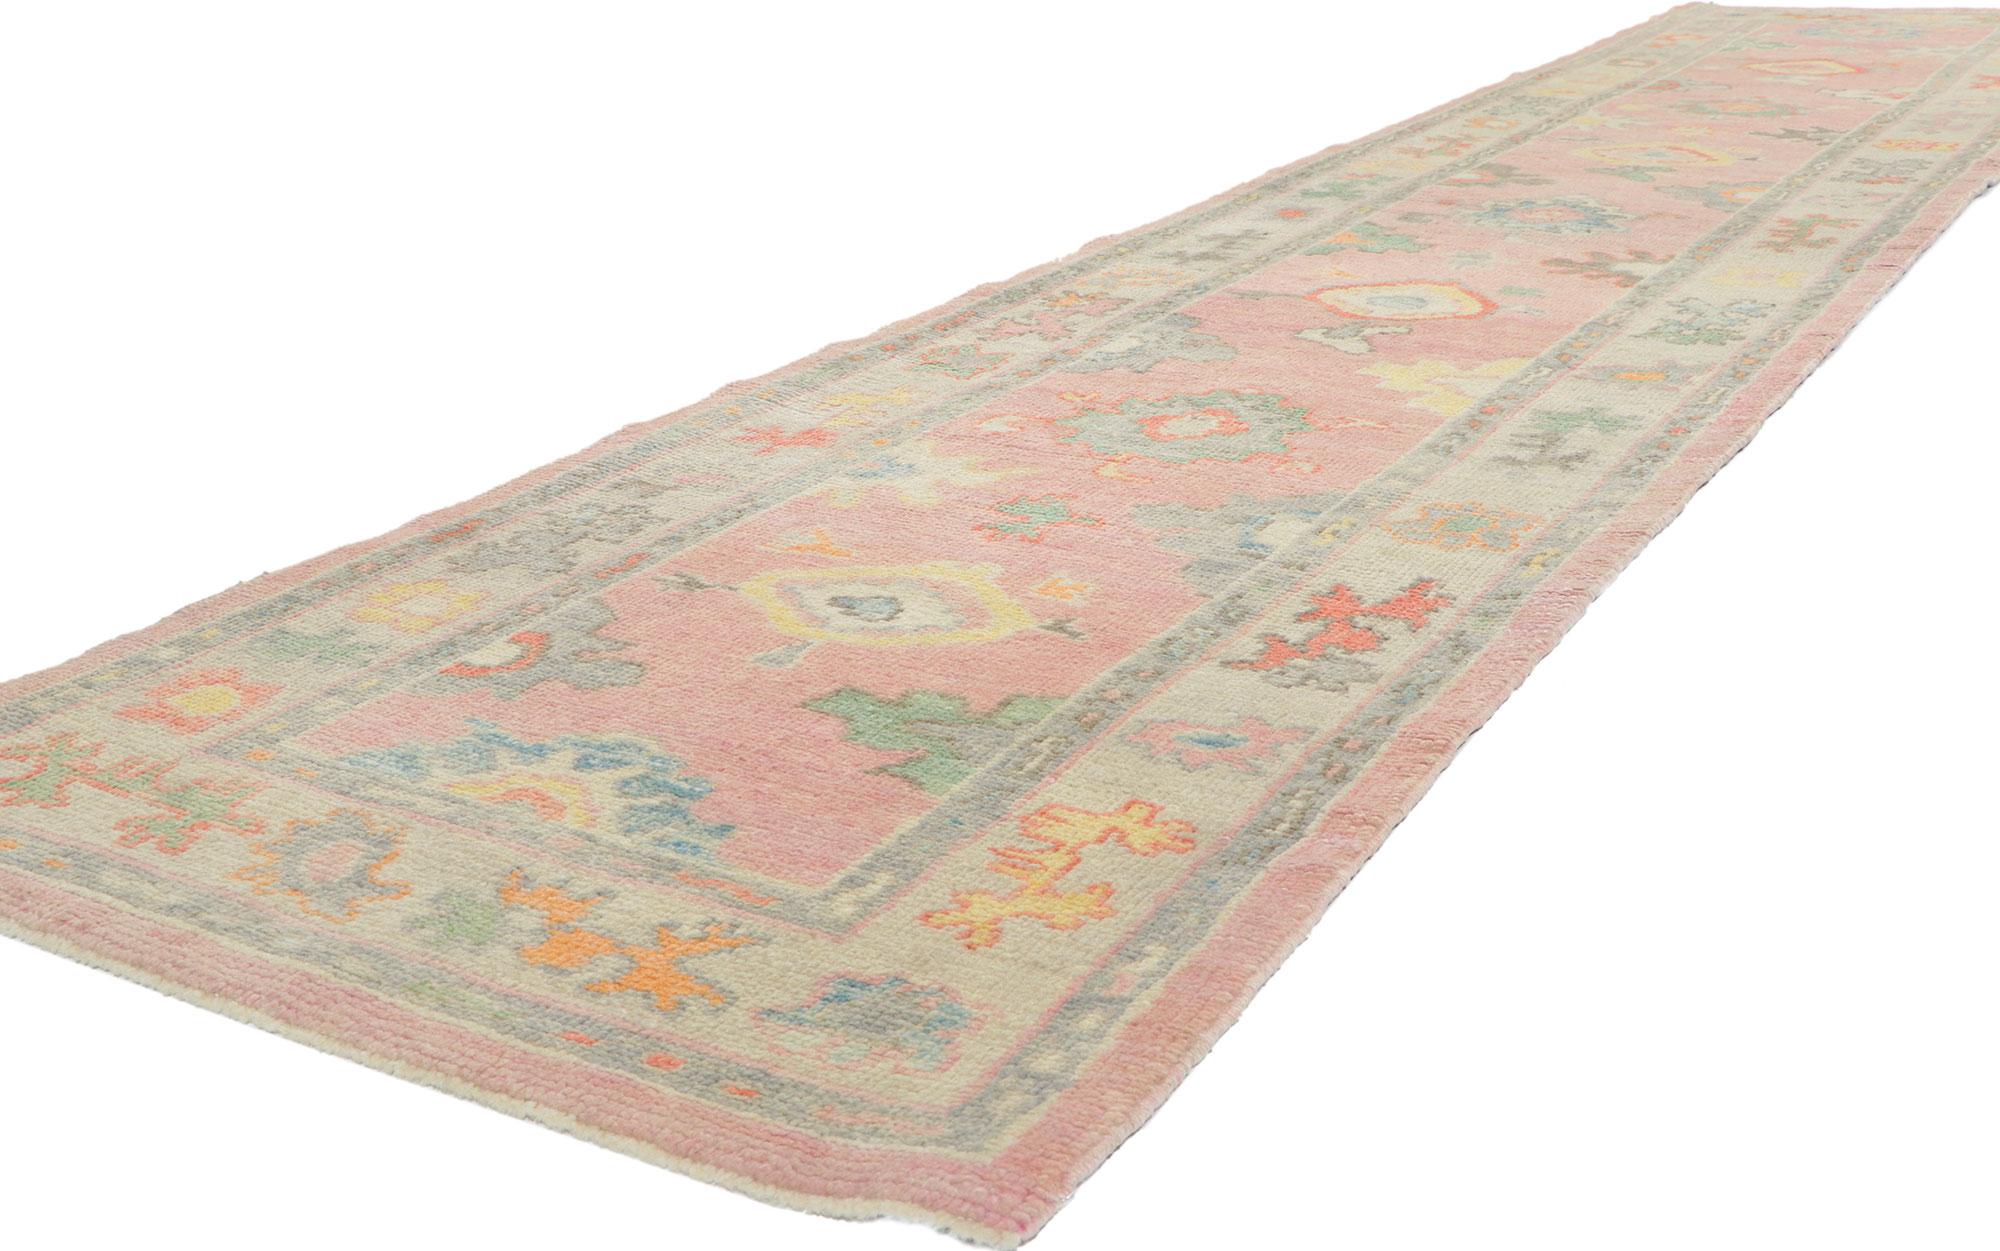 53825 New Contemporary Turkish pink oushak runner with modern style 02'10 x 14'01. This hand-knotted wool contemporary Turkish Oushak runner features an all-over botanical pattern composed of amorphous organic motifs spread across an abrashed pink